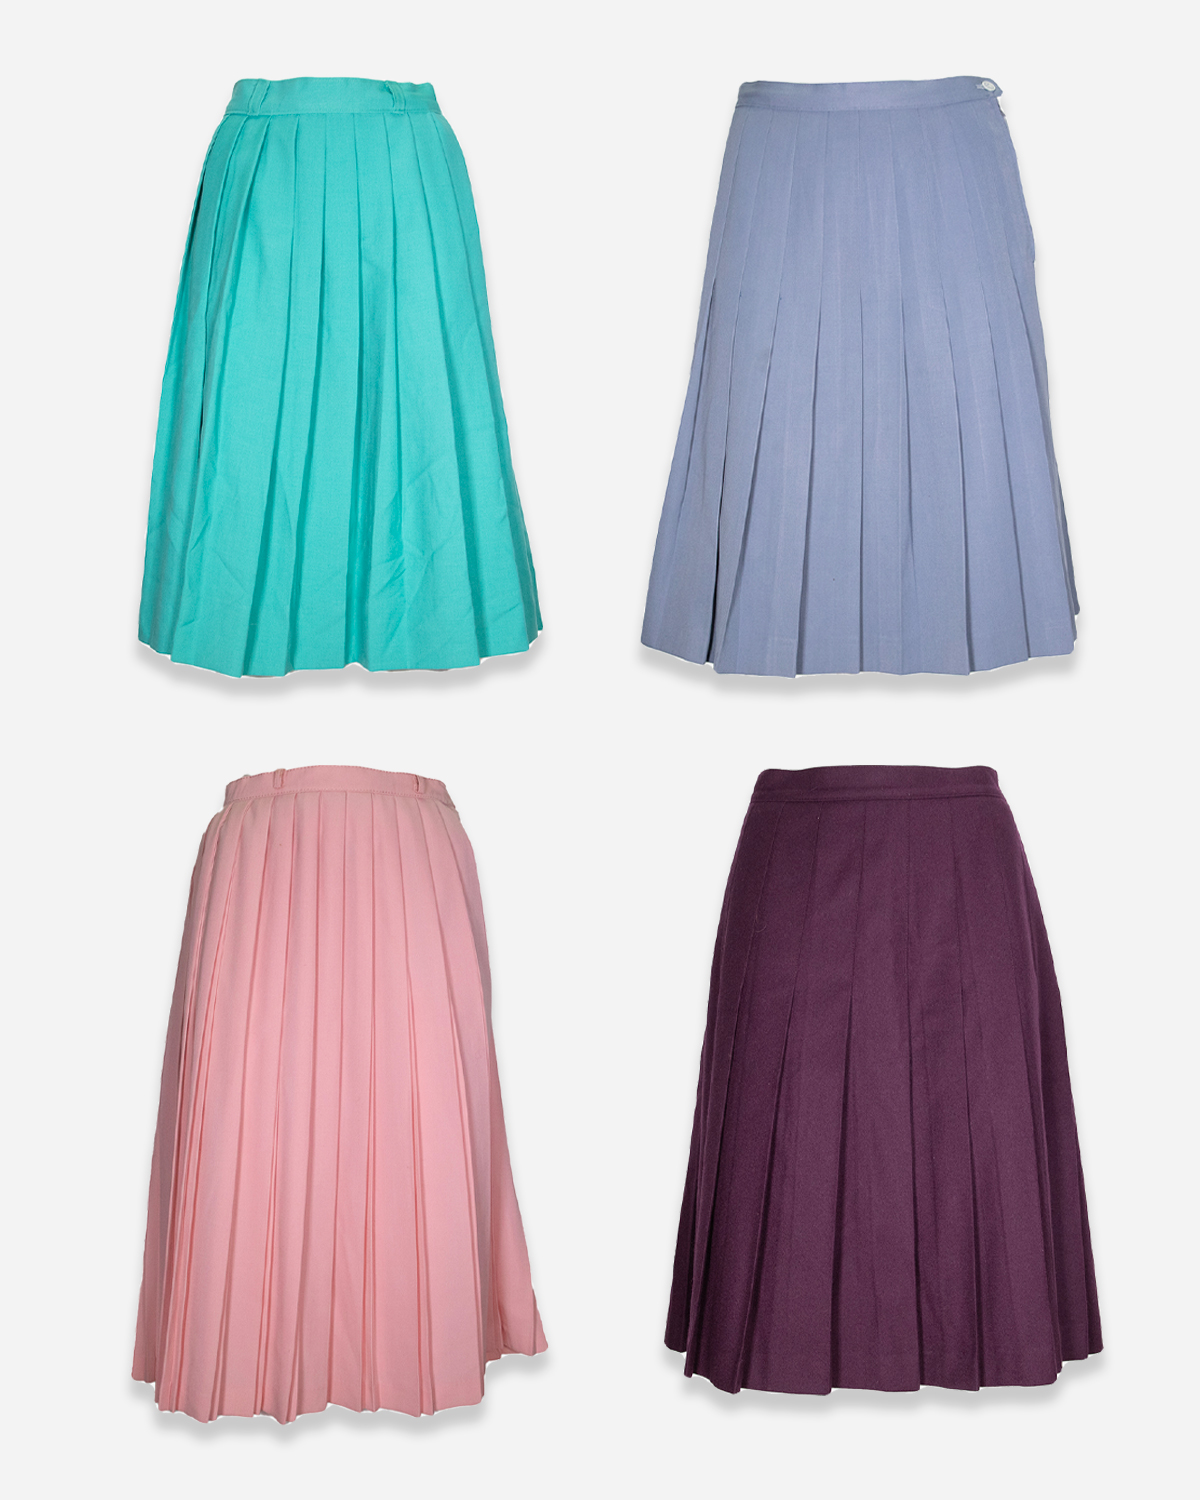 Women's pleated winter skirts: 4 pieces